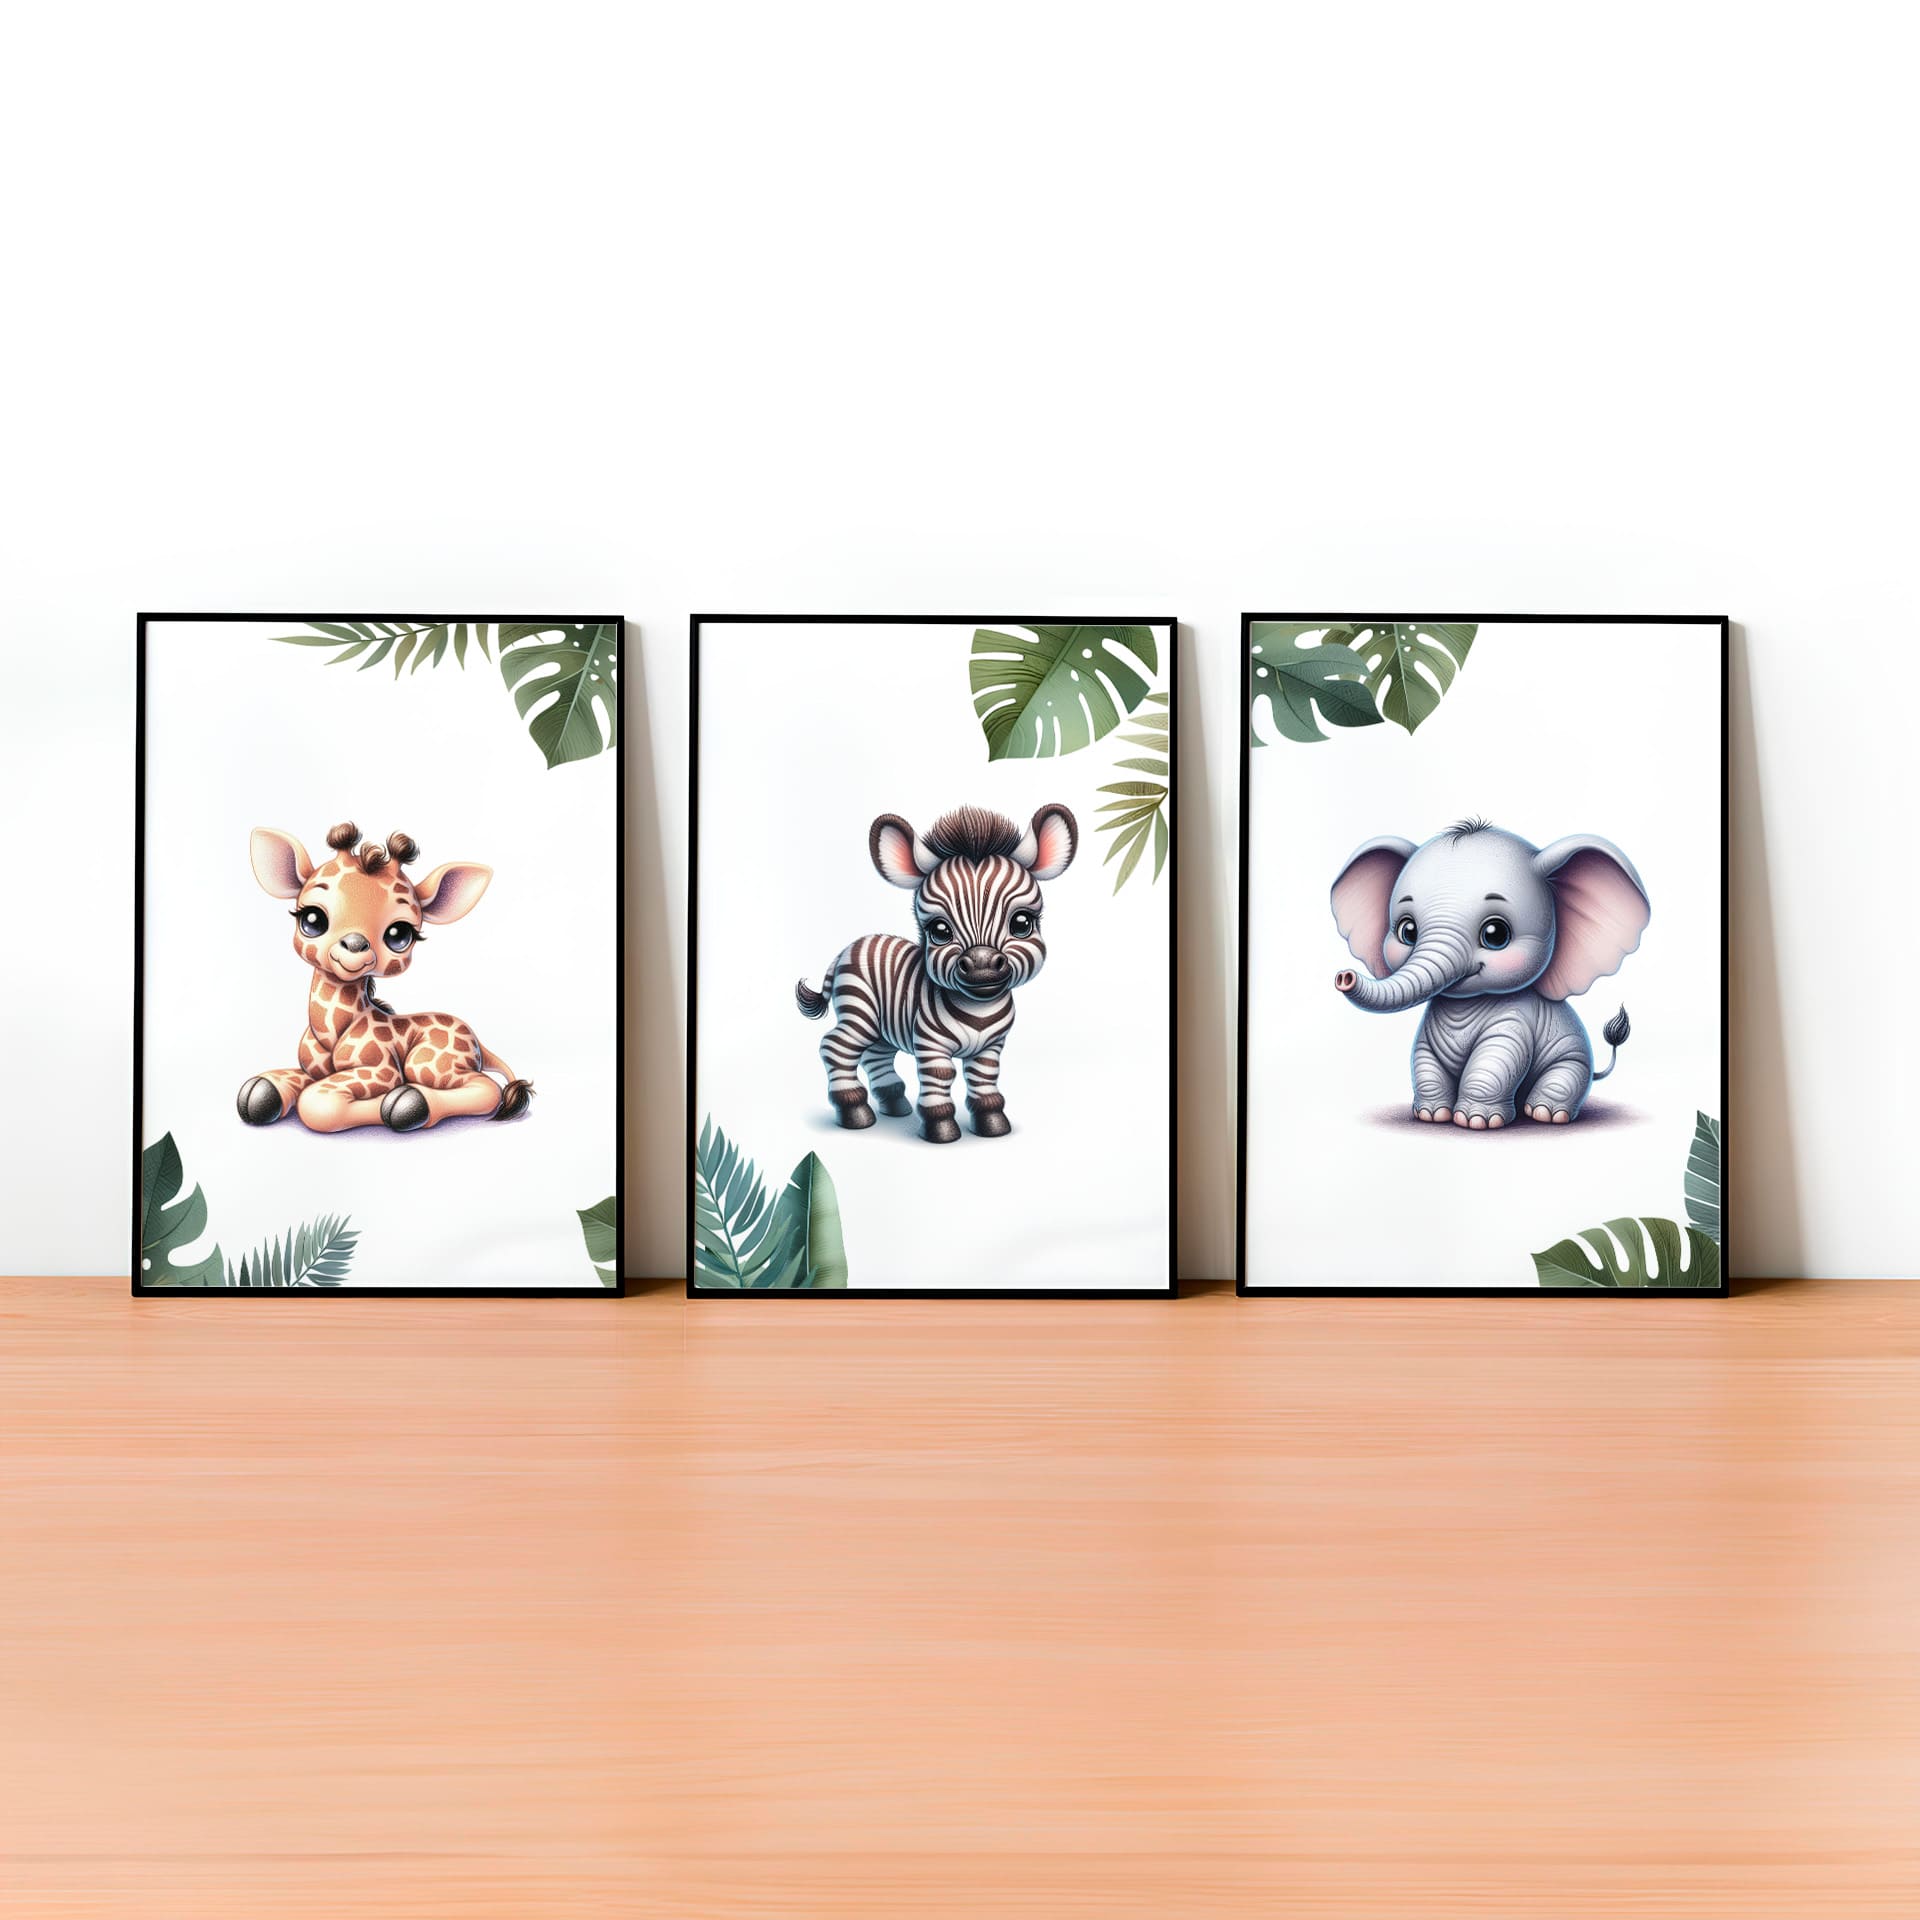 Set of  three A4 prints featuring cartoony and brightly illustrated safari animals – an elephant, giraffe, and zebra. The animals are depicted in the style of coloured pencil drawings with jungle-style leaves adorning the edges of the prints. 